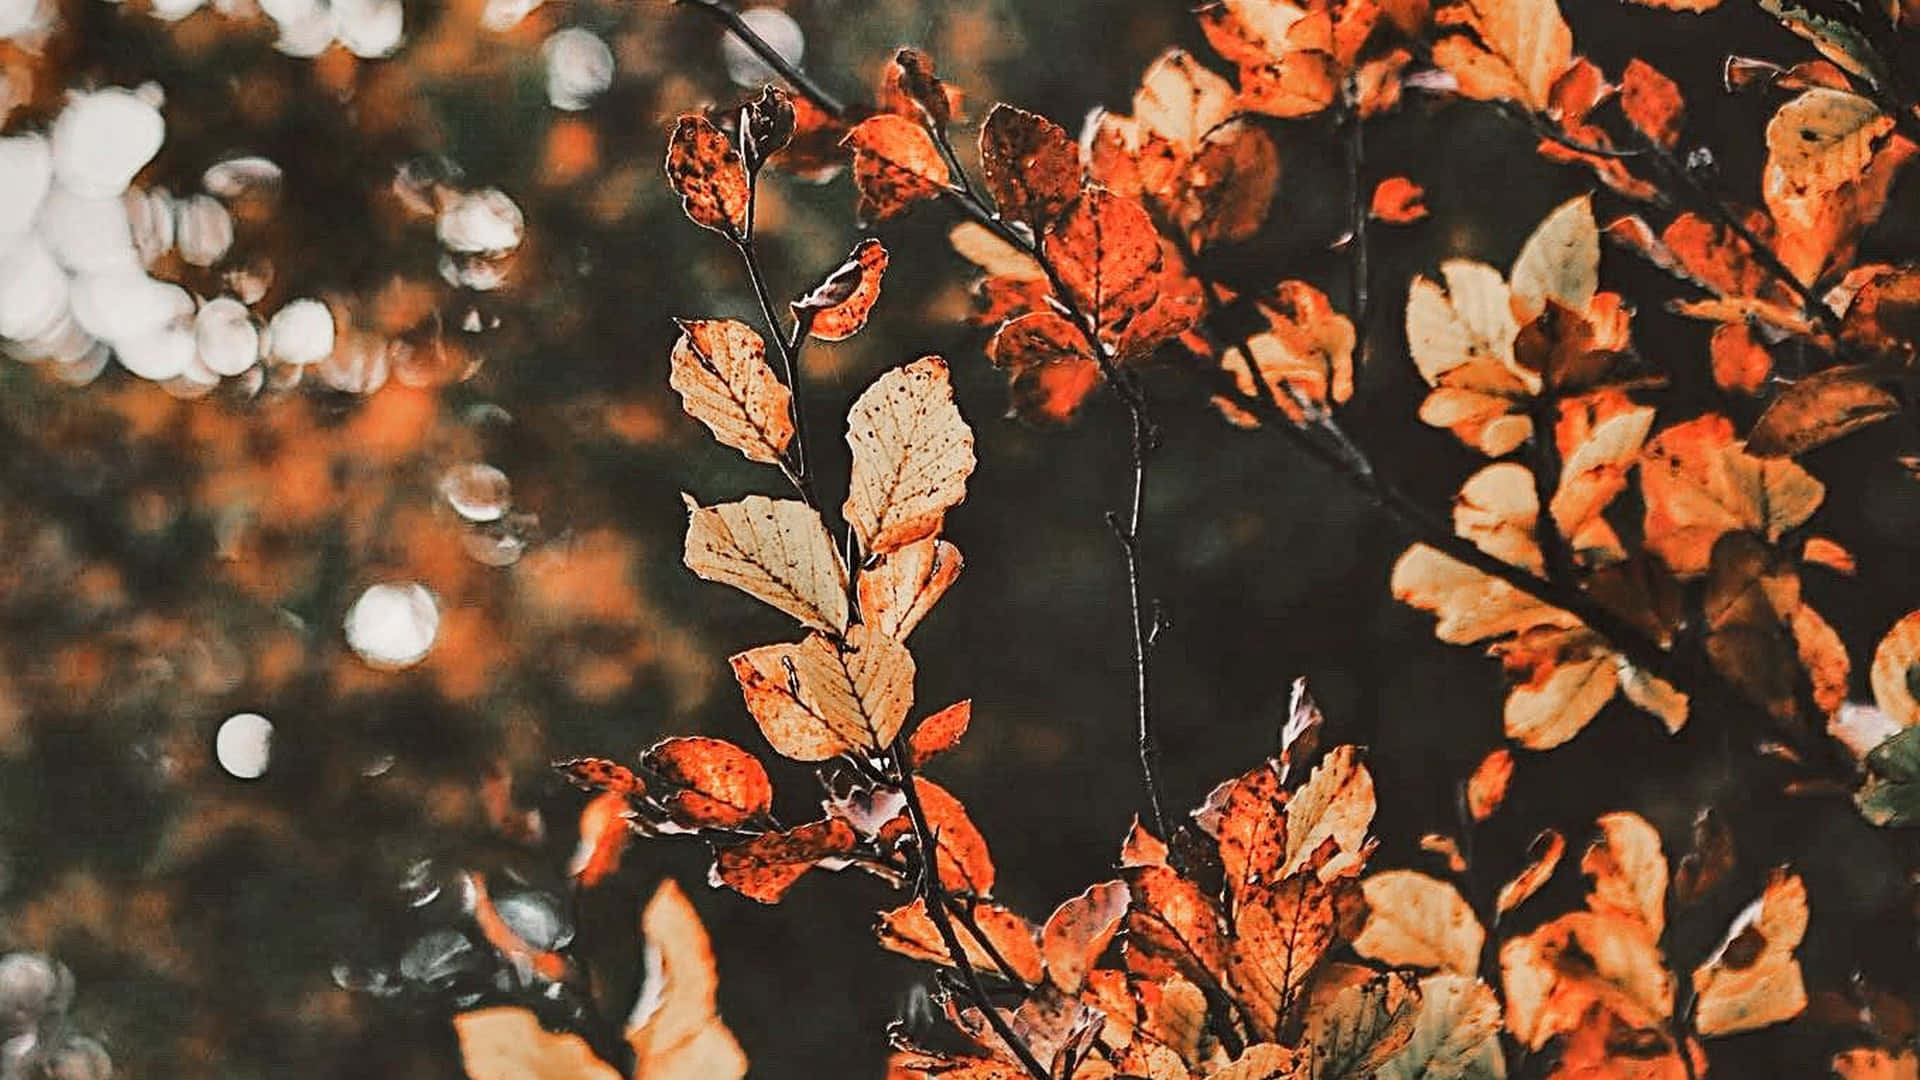 Feel the colors of Fall with this beautiful desktop wallpaper